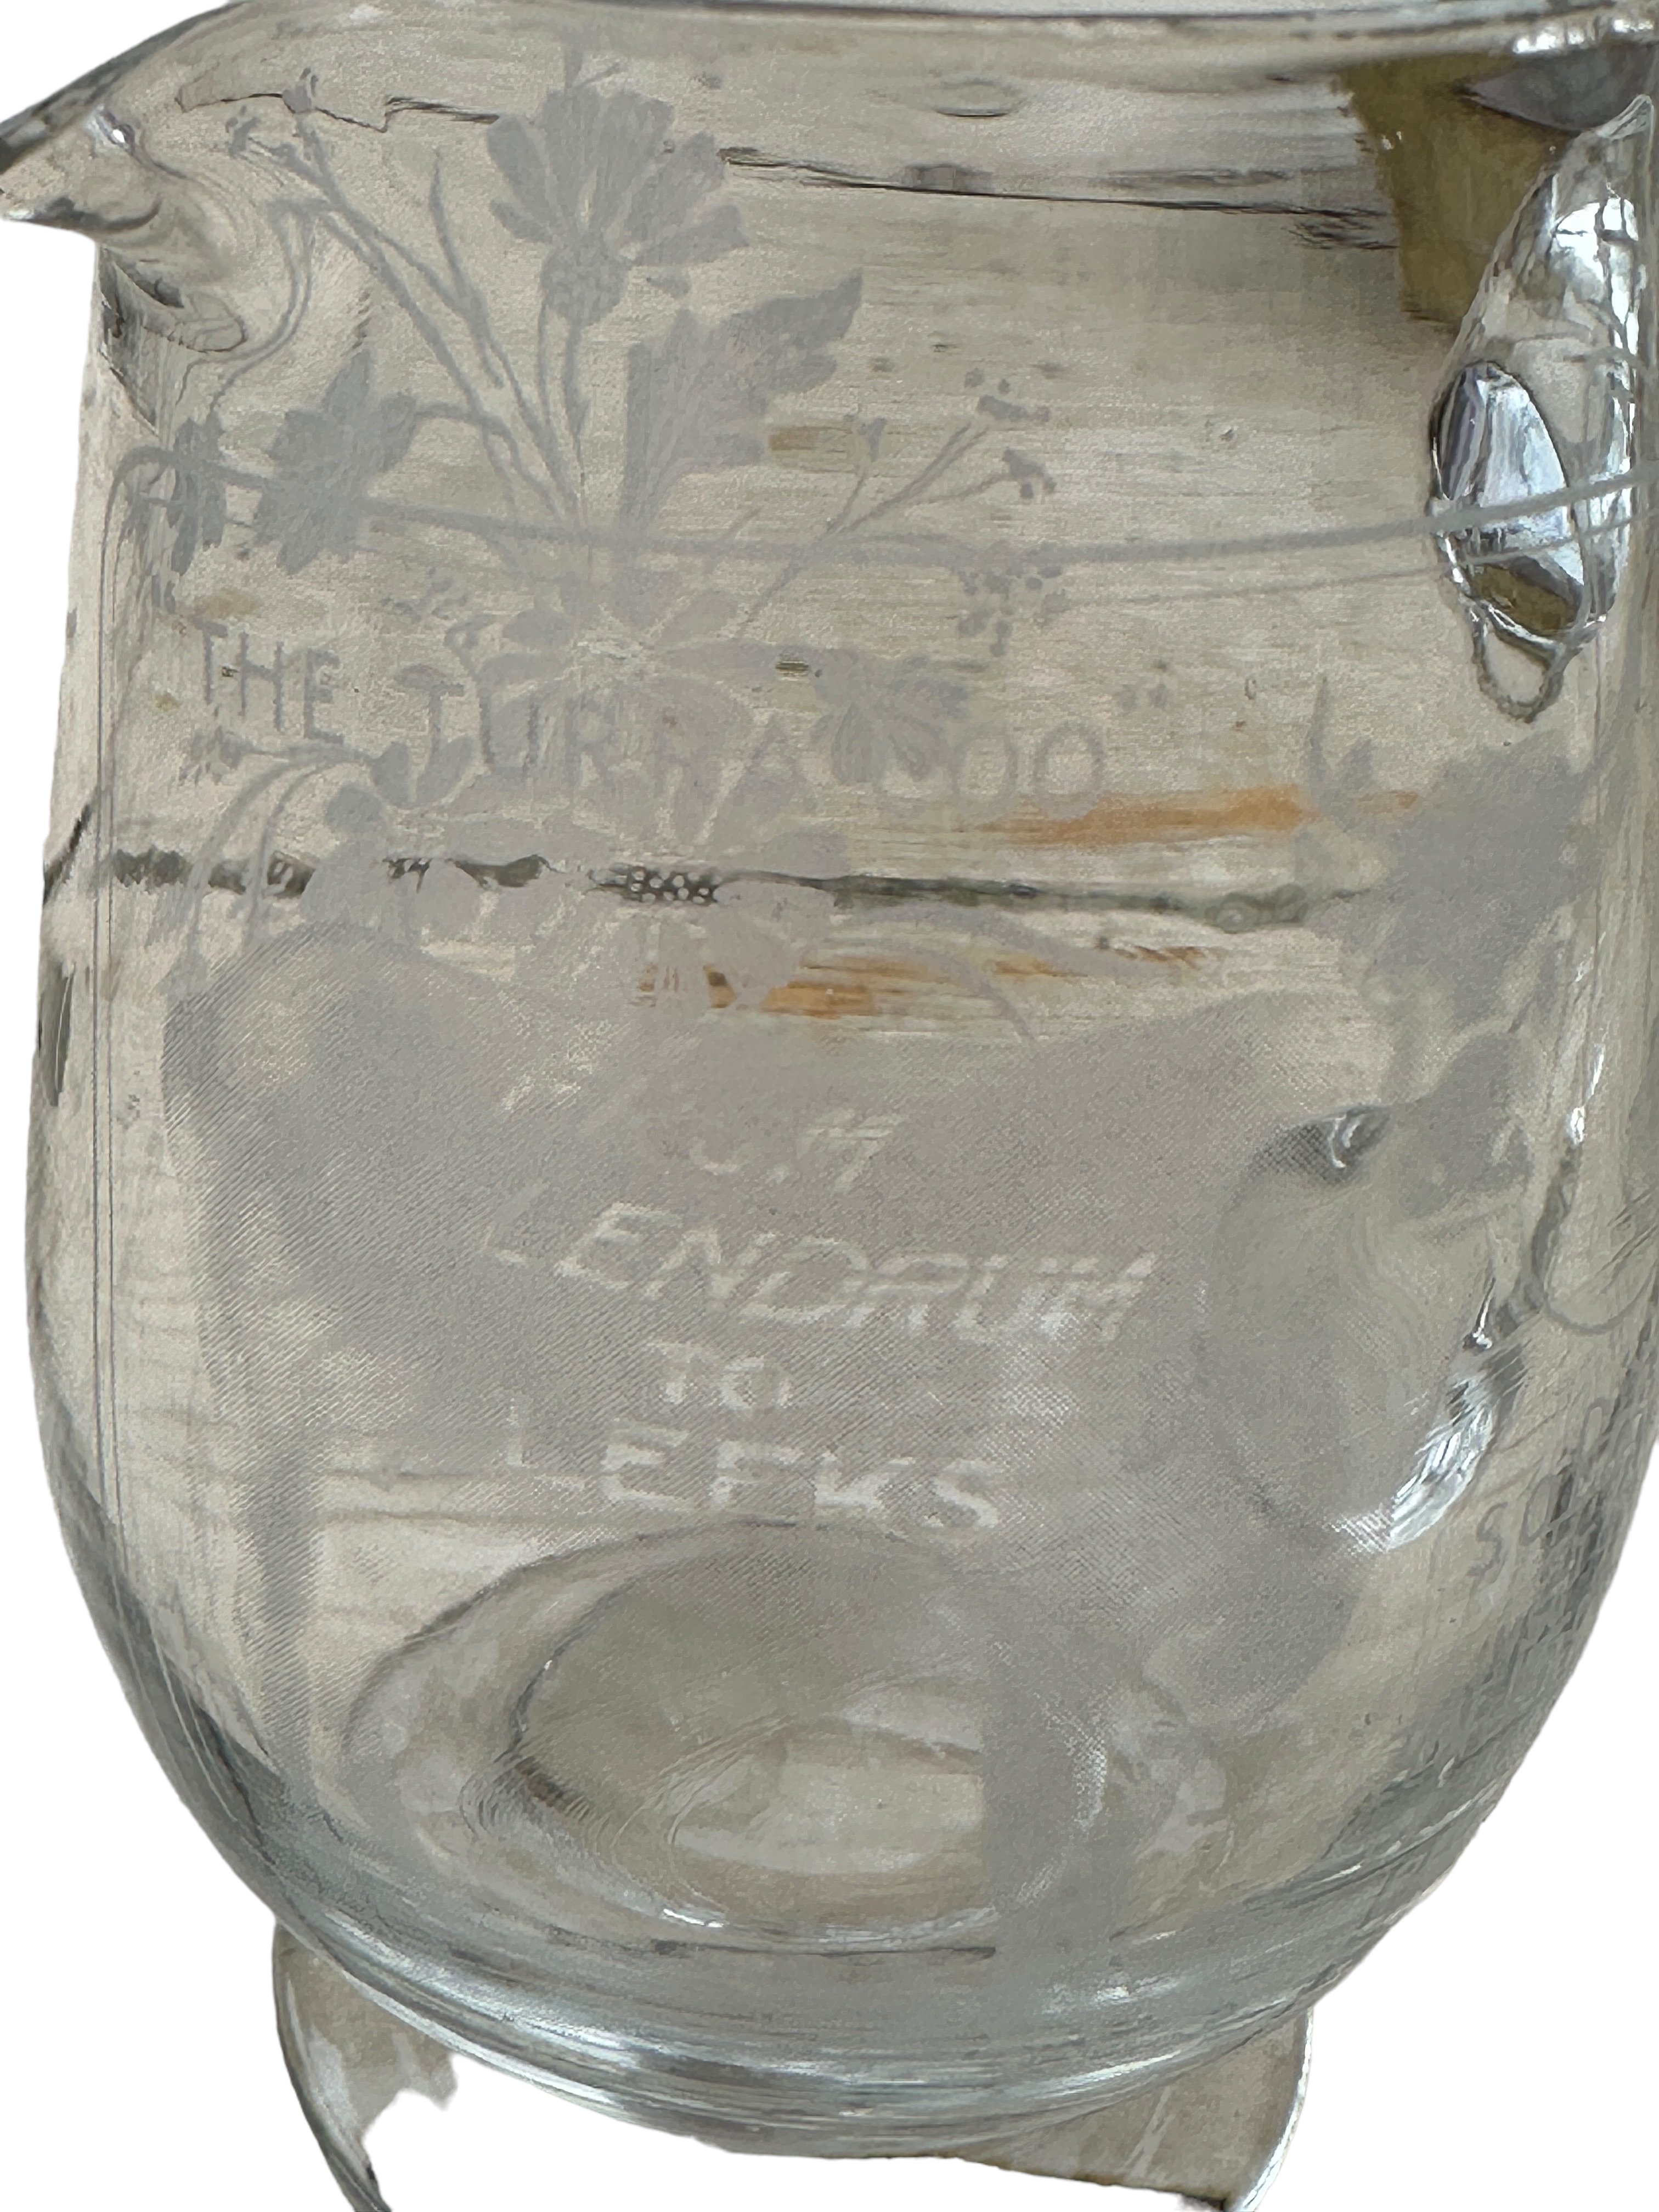 Antique Glass " The Turra Coo from Lendrum to Leeks" Jug - 4" tall. Condition Report: It is our - Image 6 of 8